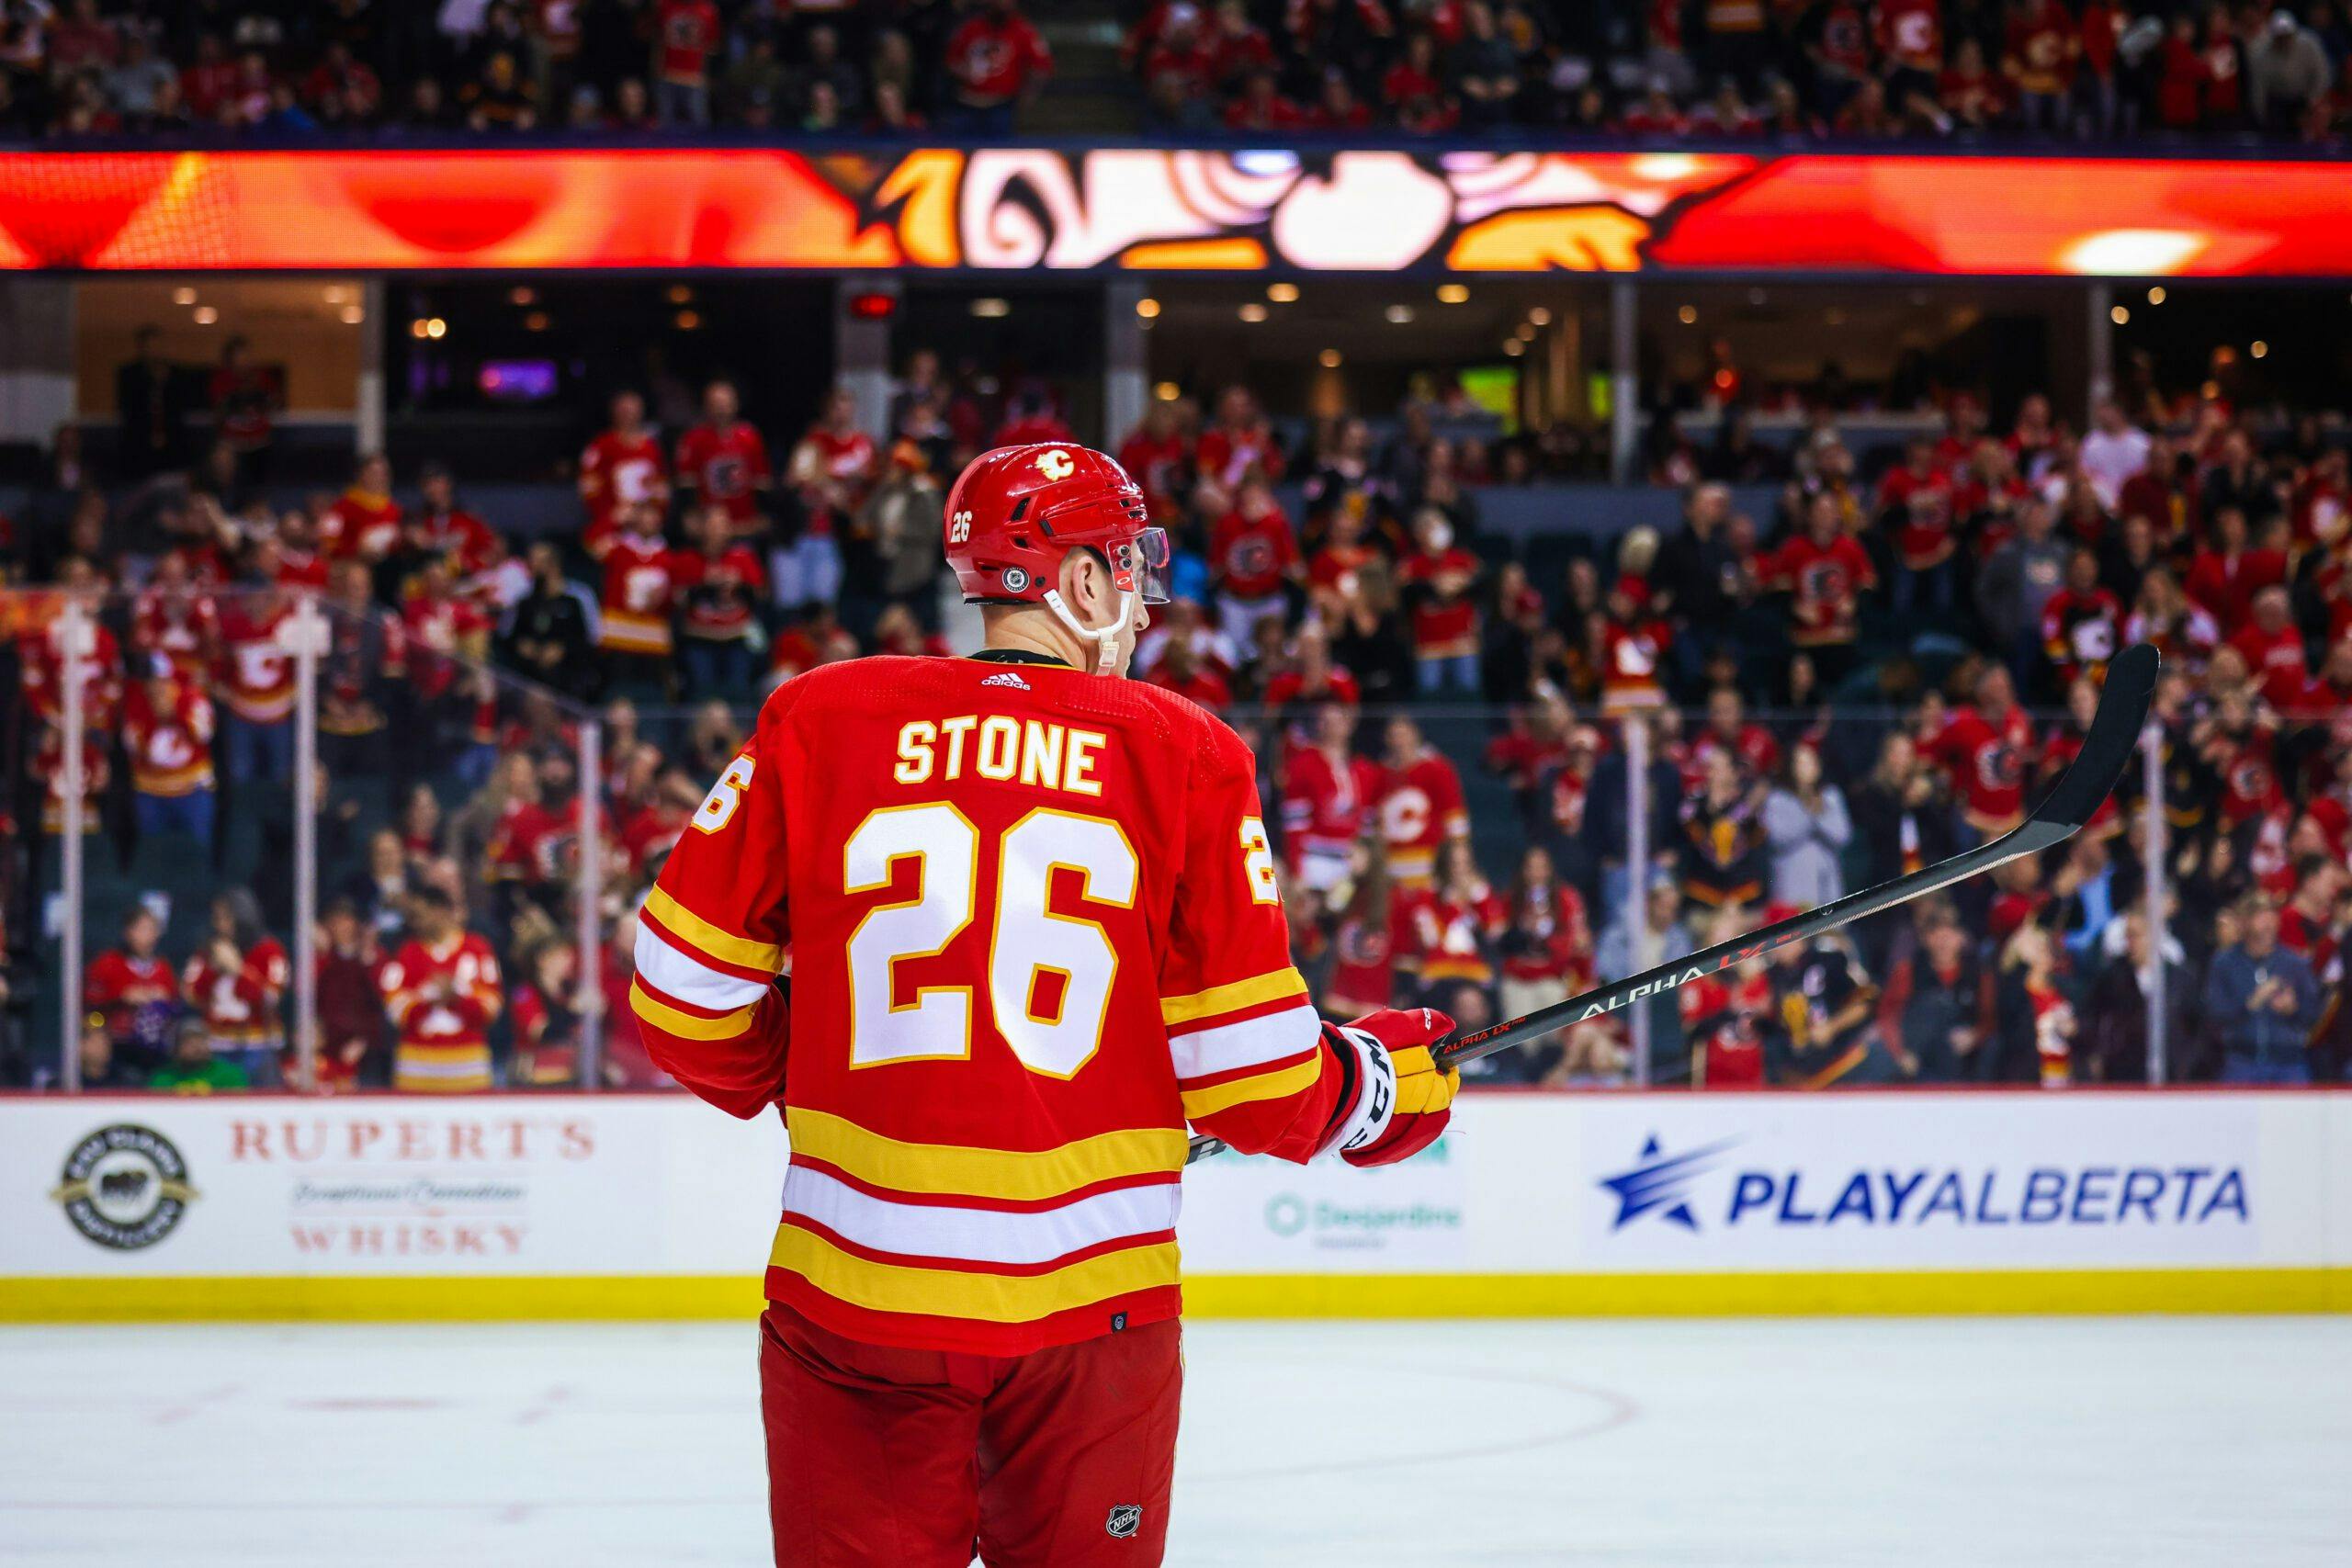 Michael Stone retires from the NHL, will join Calgary Flames in player development role